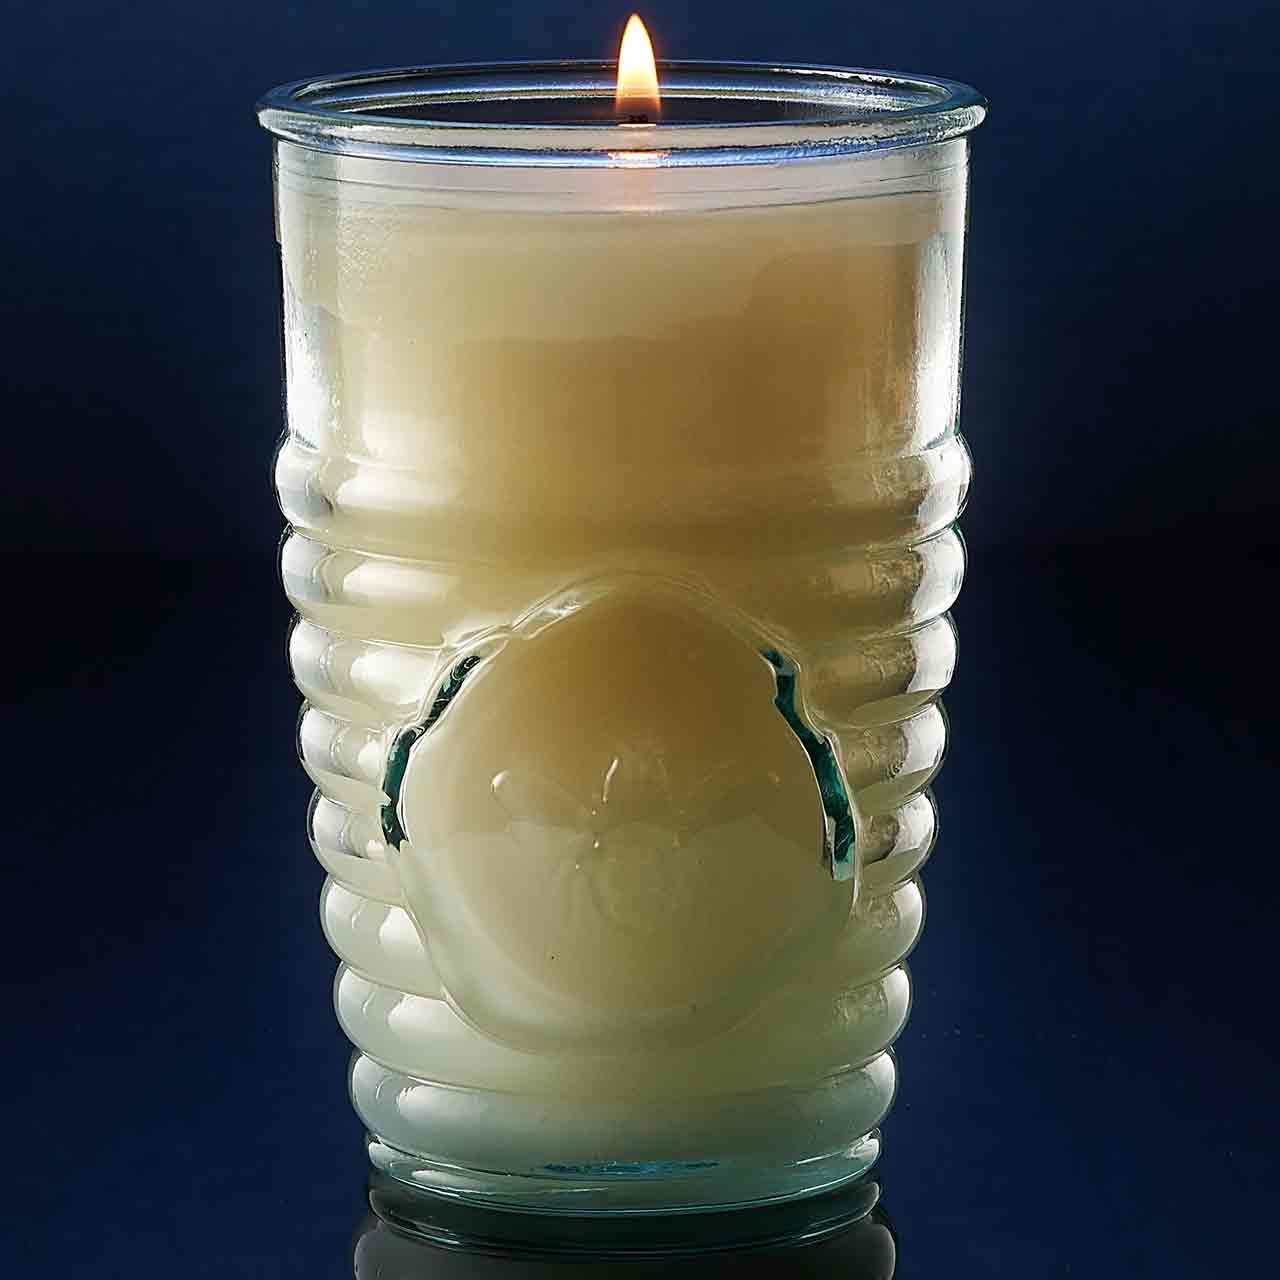 10 oz Classico Recycled Glass Candle Container - Glassnow